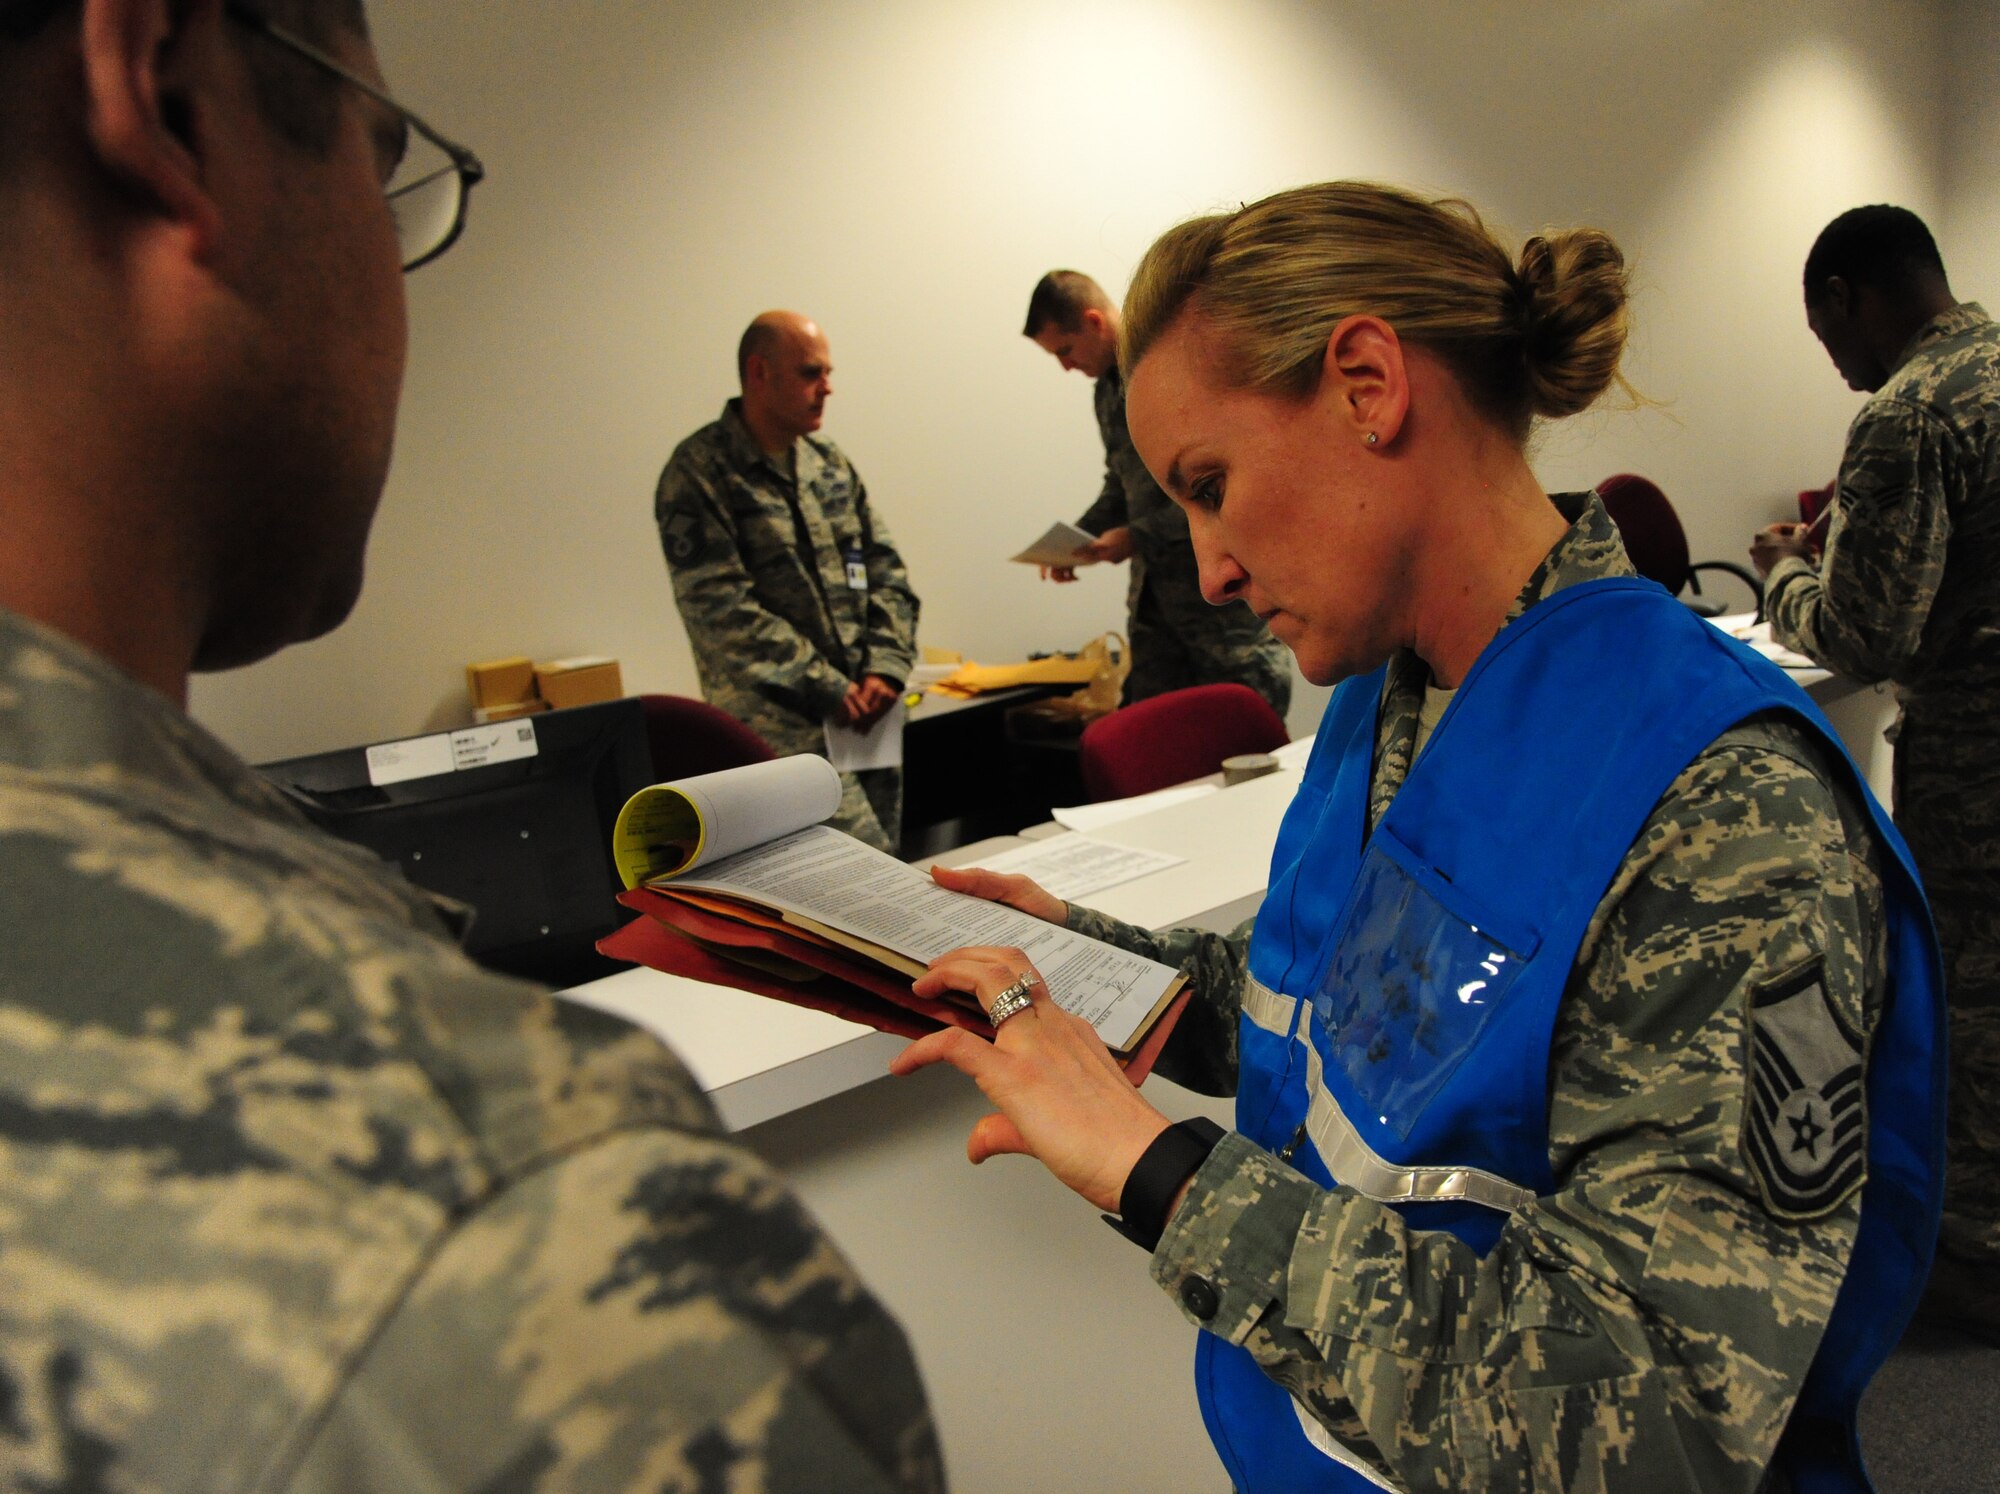 U.S. Air Force Master Sgt. Misty Moreno, 509th Force Support Squadron section chief management, reviews a member’s deployment documents during CONSTANT VIGILANCE 16 at Whiteman Air Force Base, Mo., April 12, 2016. Whiteman participates in training operations and exercises on a constant basis to ensure force readiness to perform nuclear deterrence operations and long-range strike missions when called upon. (U.S. Air Force photo by Airman 1st Class Keenan Berry)